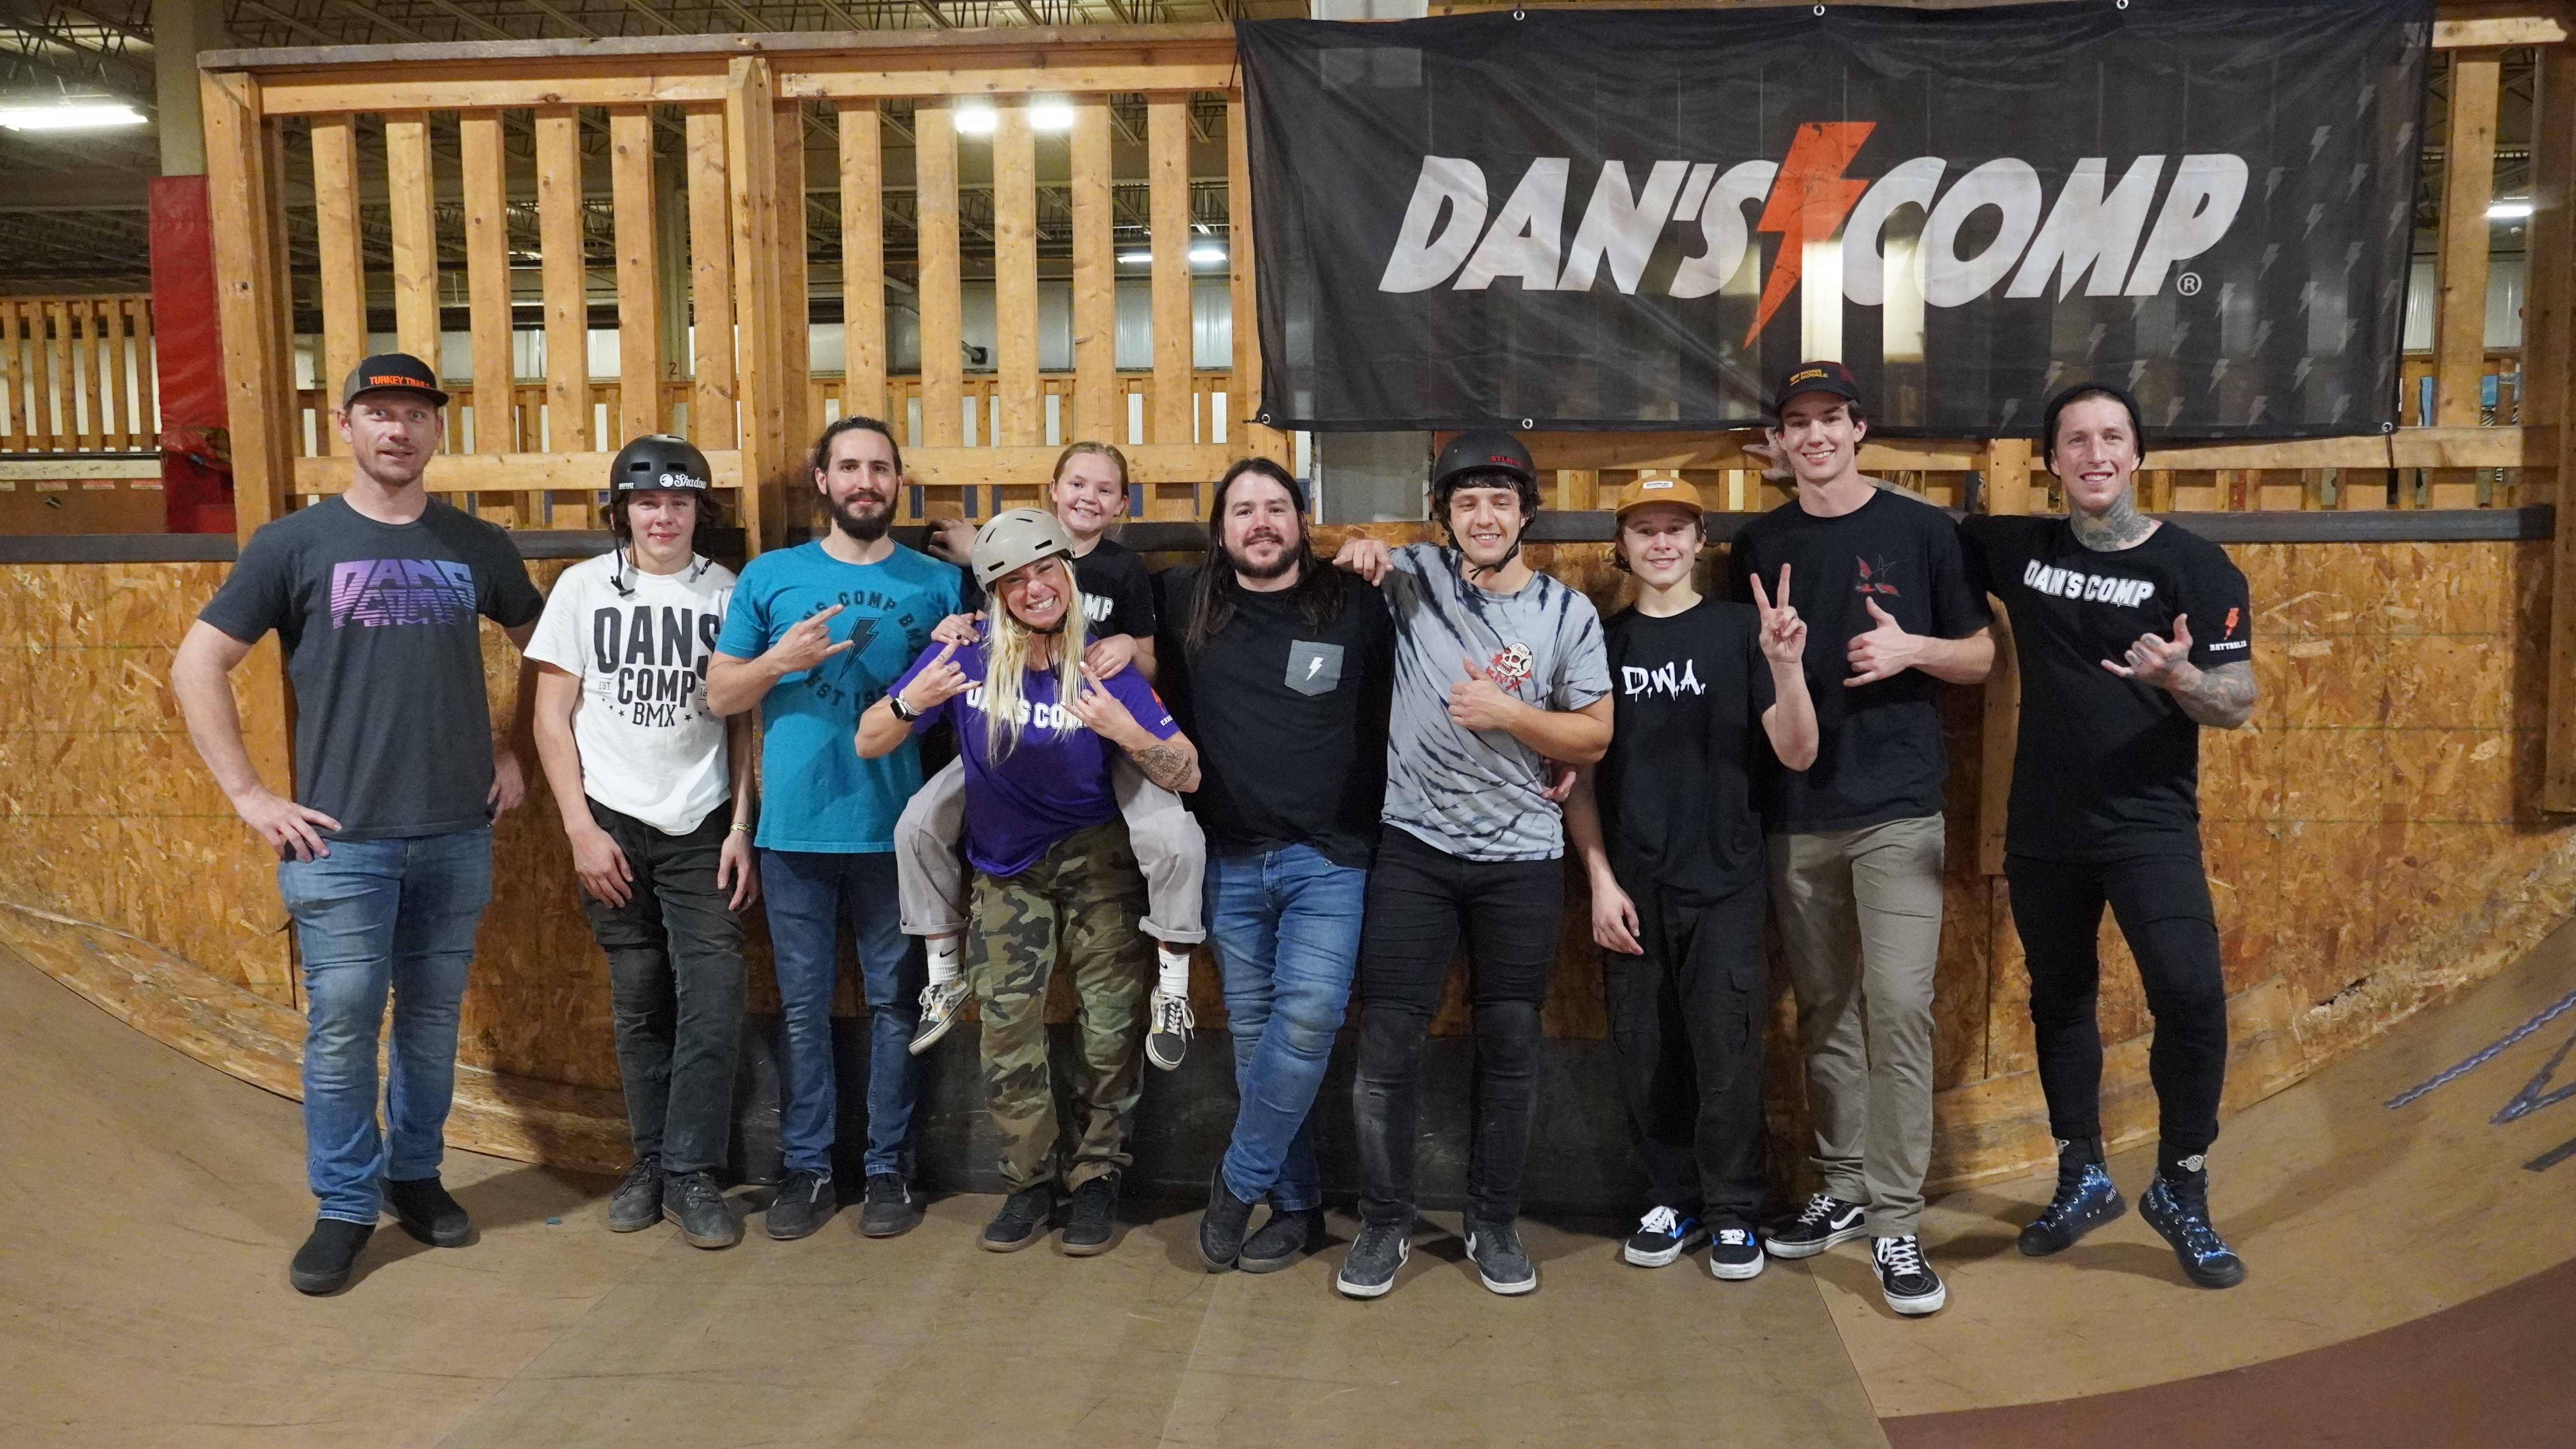 Dan's Comp team and employees at the Boston Jam